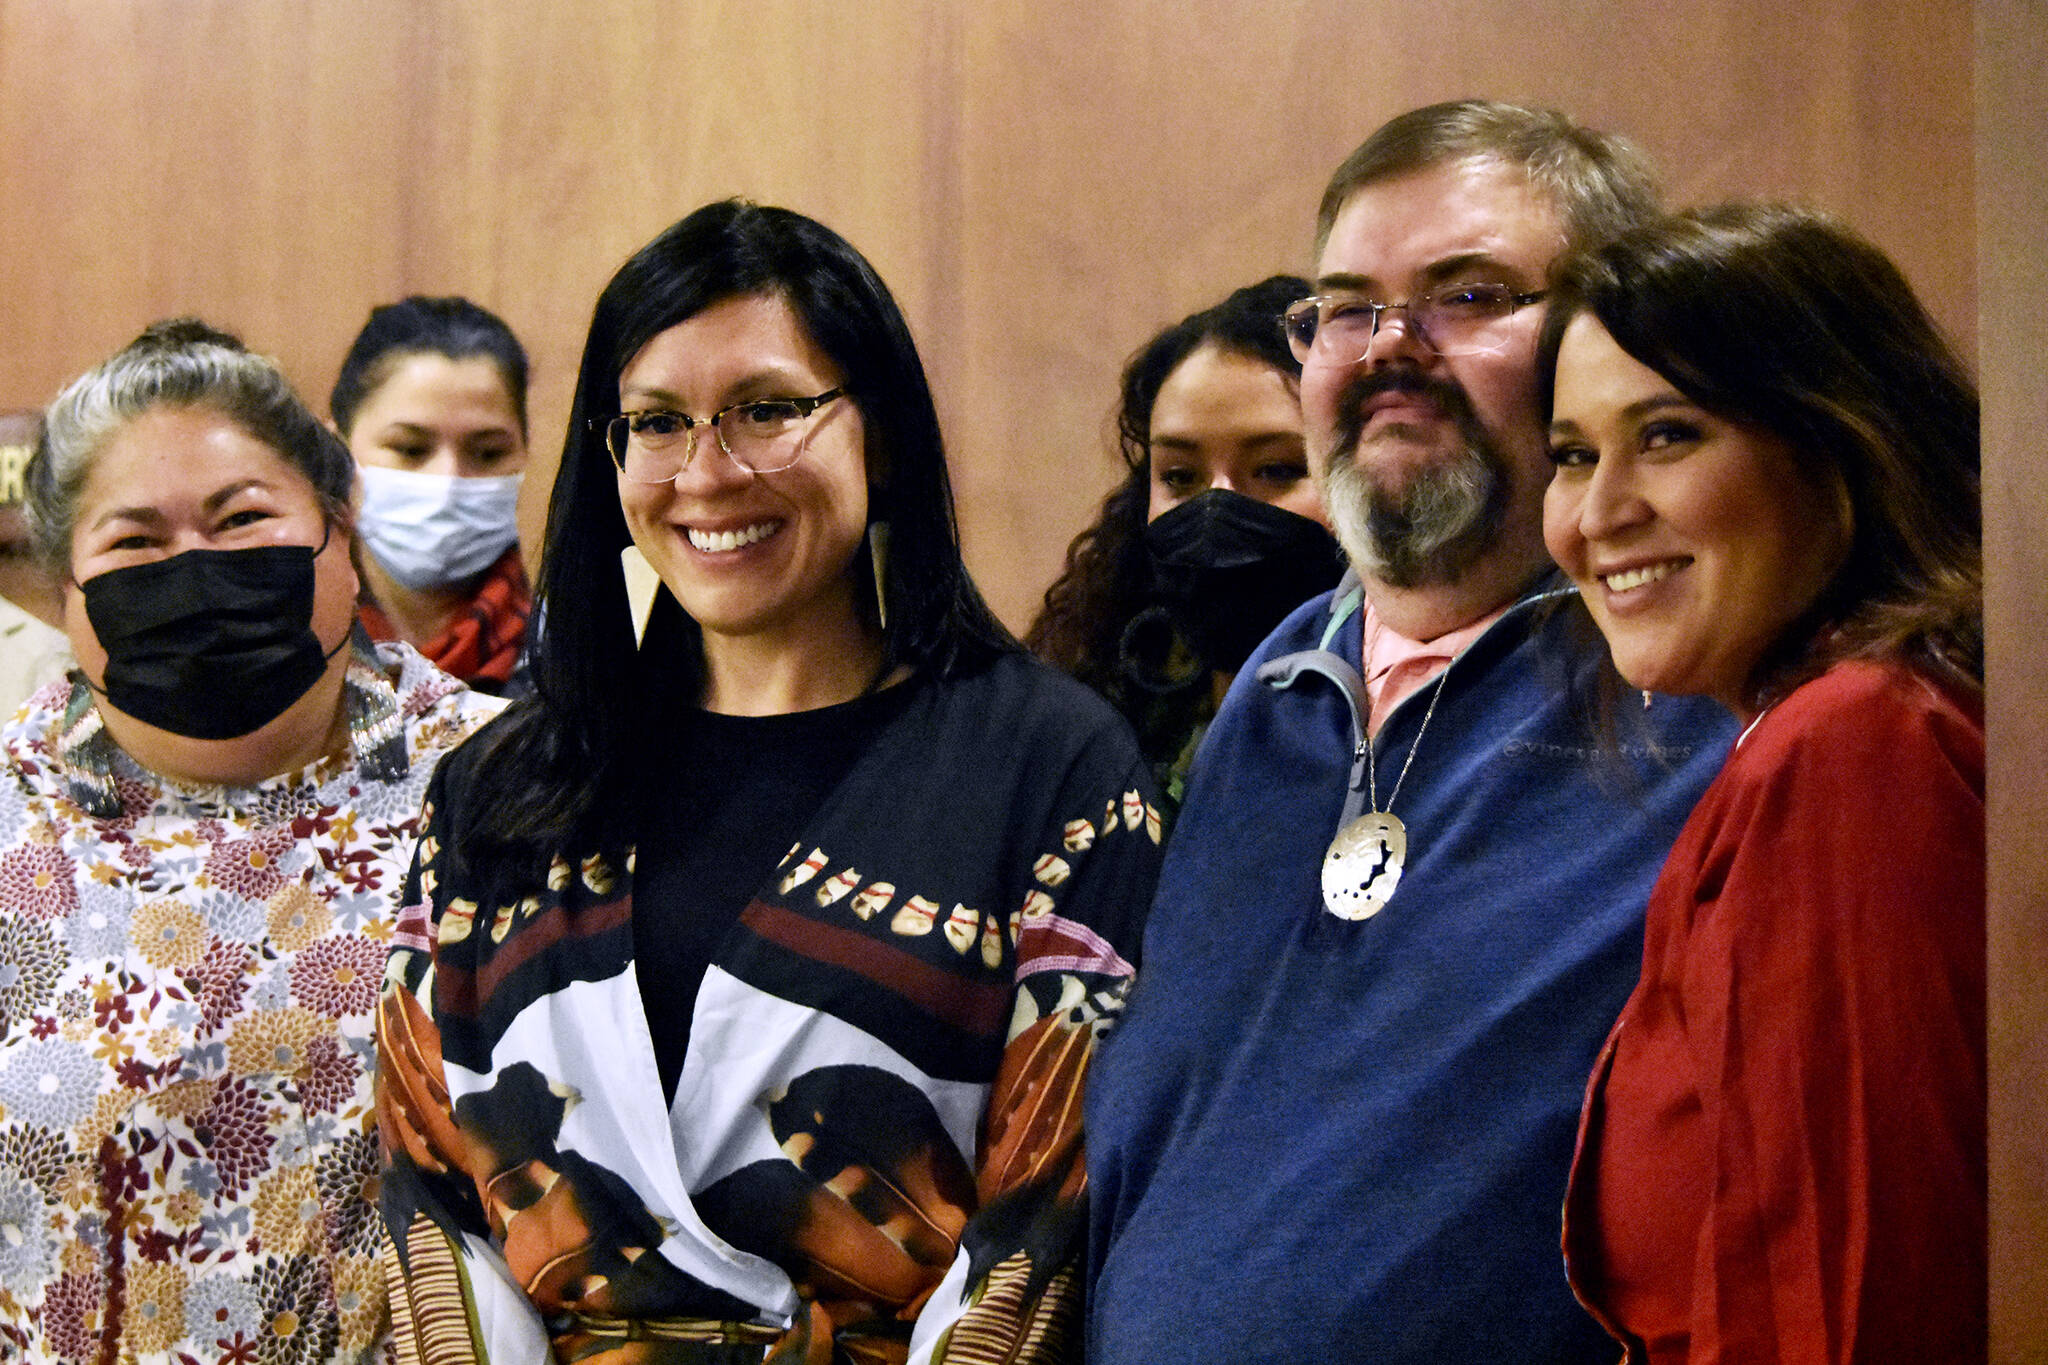 From left to right, La quen náay Liz Medicine Crow, Rep. Tiffany Zulkosky, D-Bethel; Richard Chalyee Éesh Peterson and ‘Wáahlaal Gidáak Barbara Blake were in the gallery of the Alaska State Senate on Friday, May 13, 2022, to watch debate on House Bill 123, a bill to formally recognize Alaska’s federally-recognized tribes. The bill bassed unanimously. (Peter Segall / Juneau Empire)